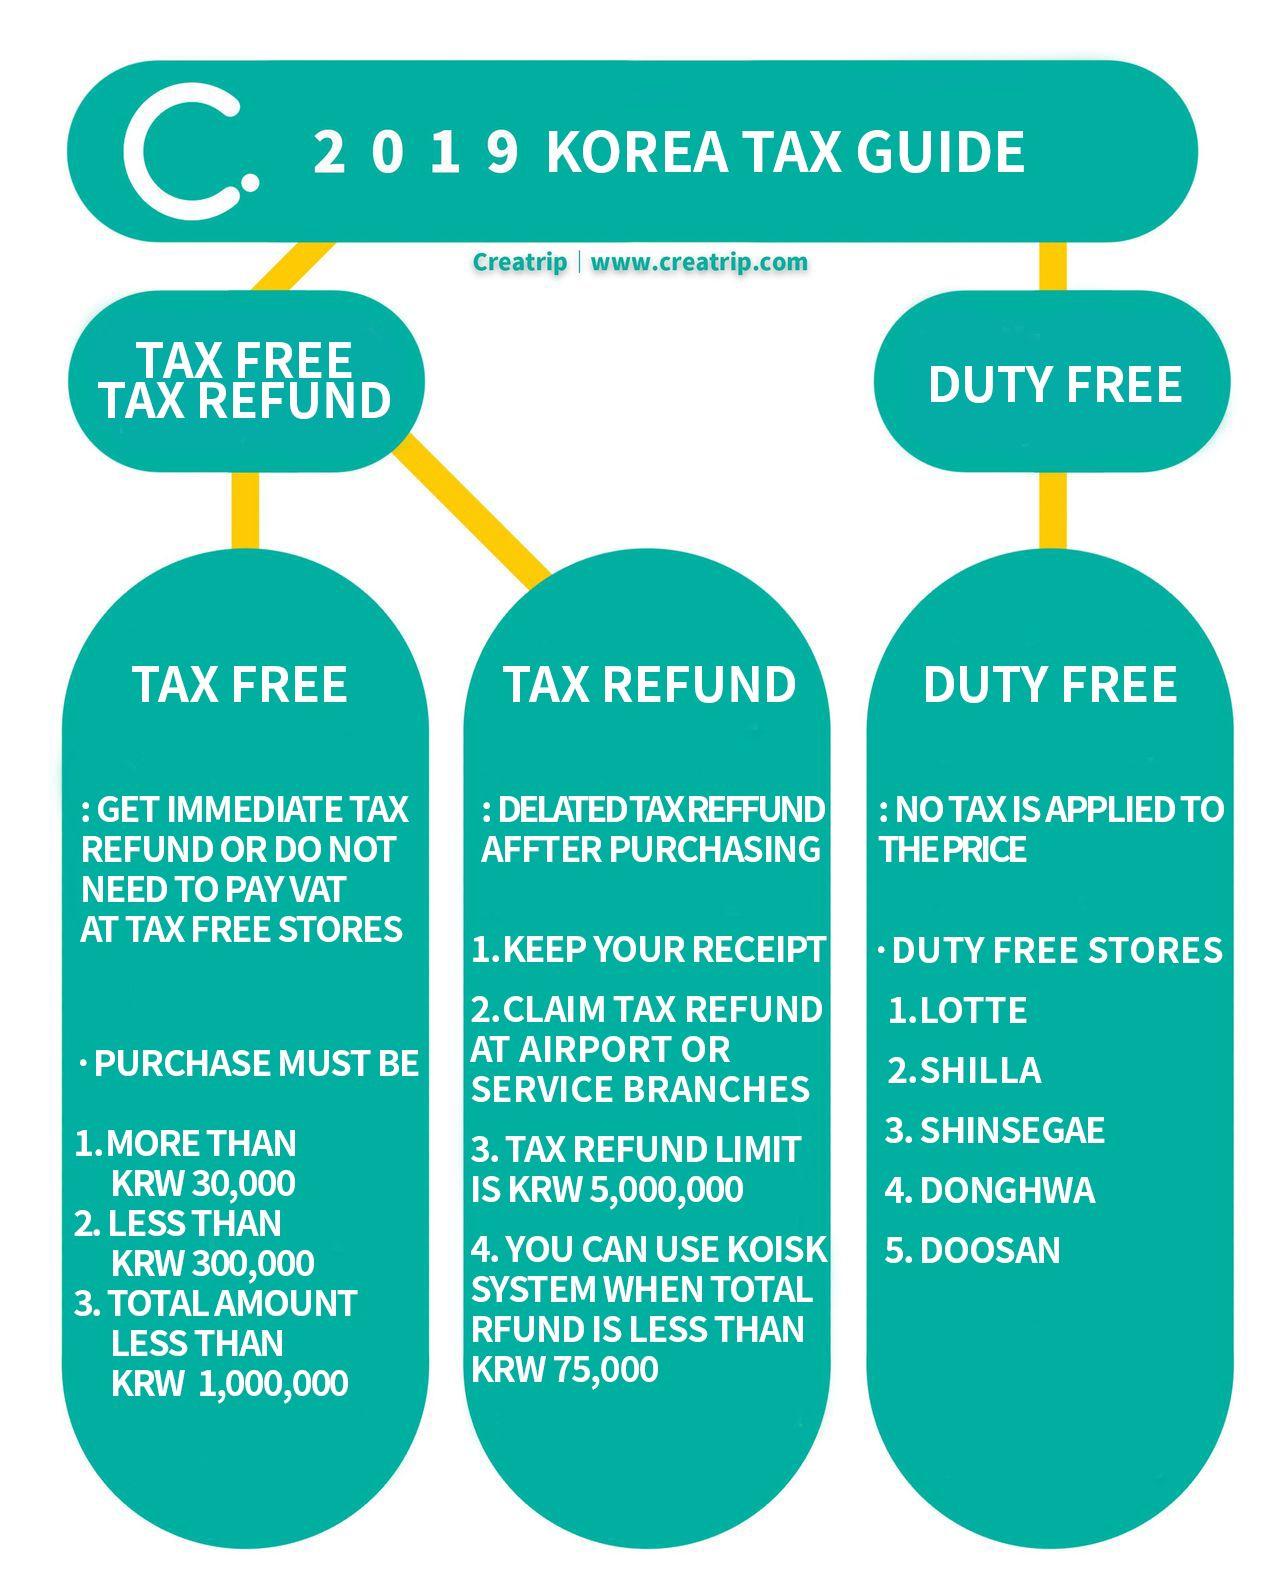 creatrip-how-to-get-a-tax-refund-in-korea